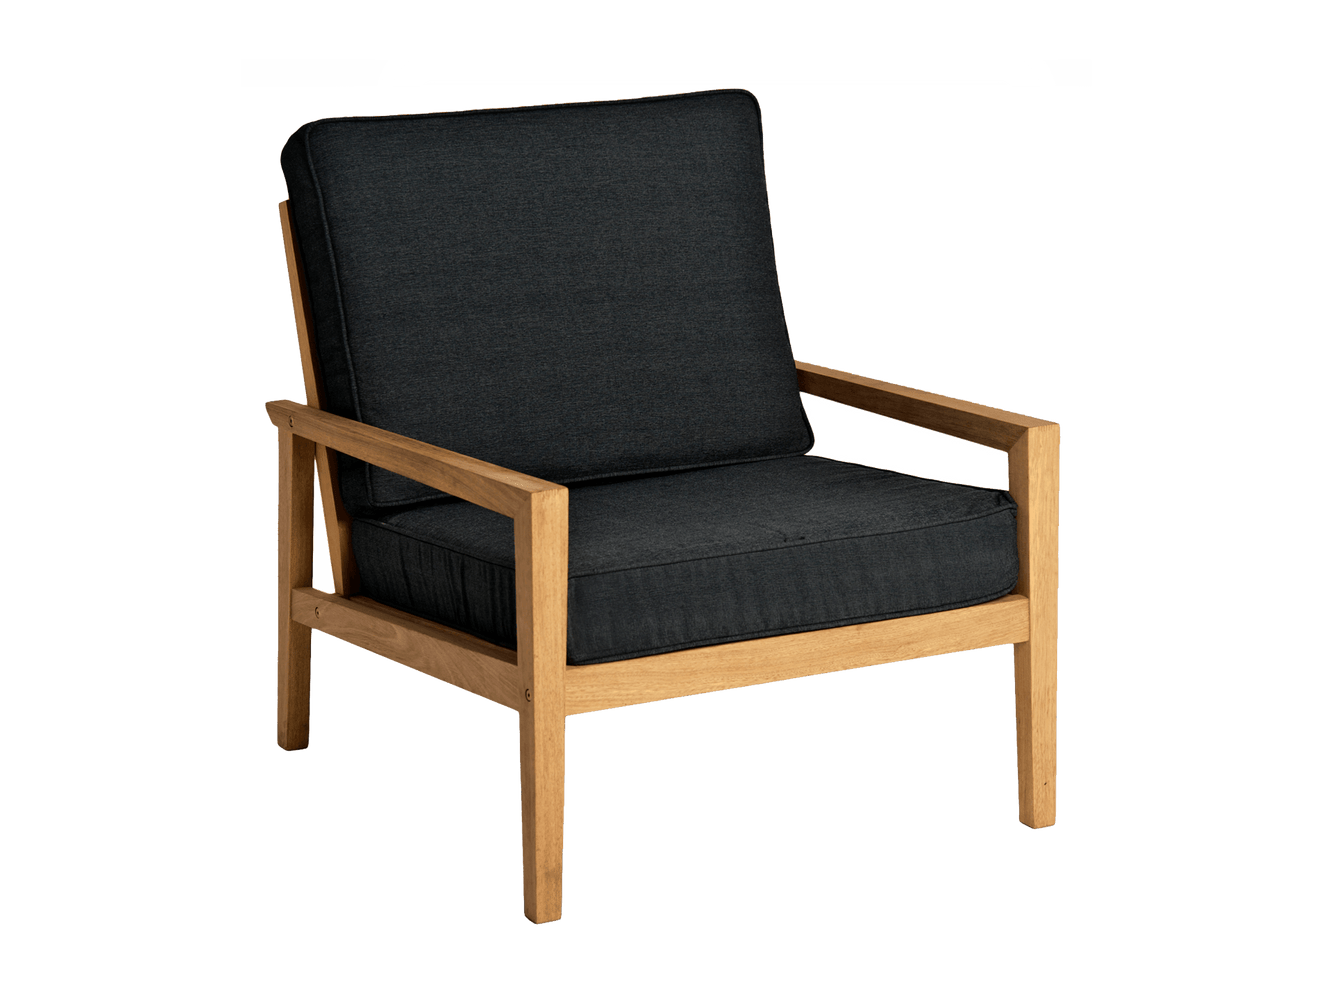 Roble Lounge Chair with Cushion - Kubek Furniture